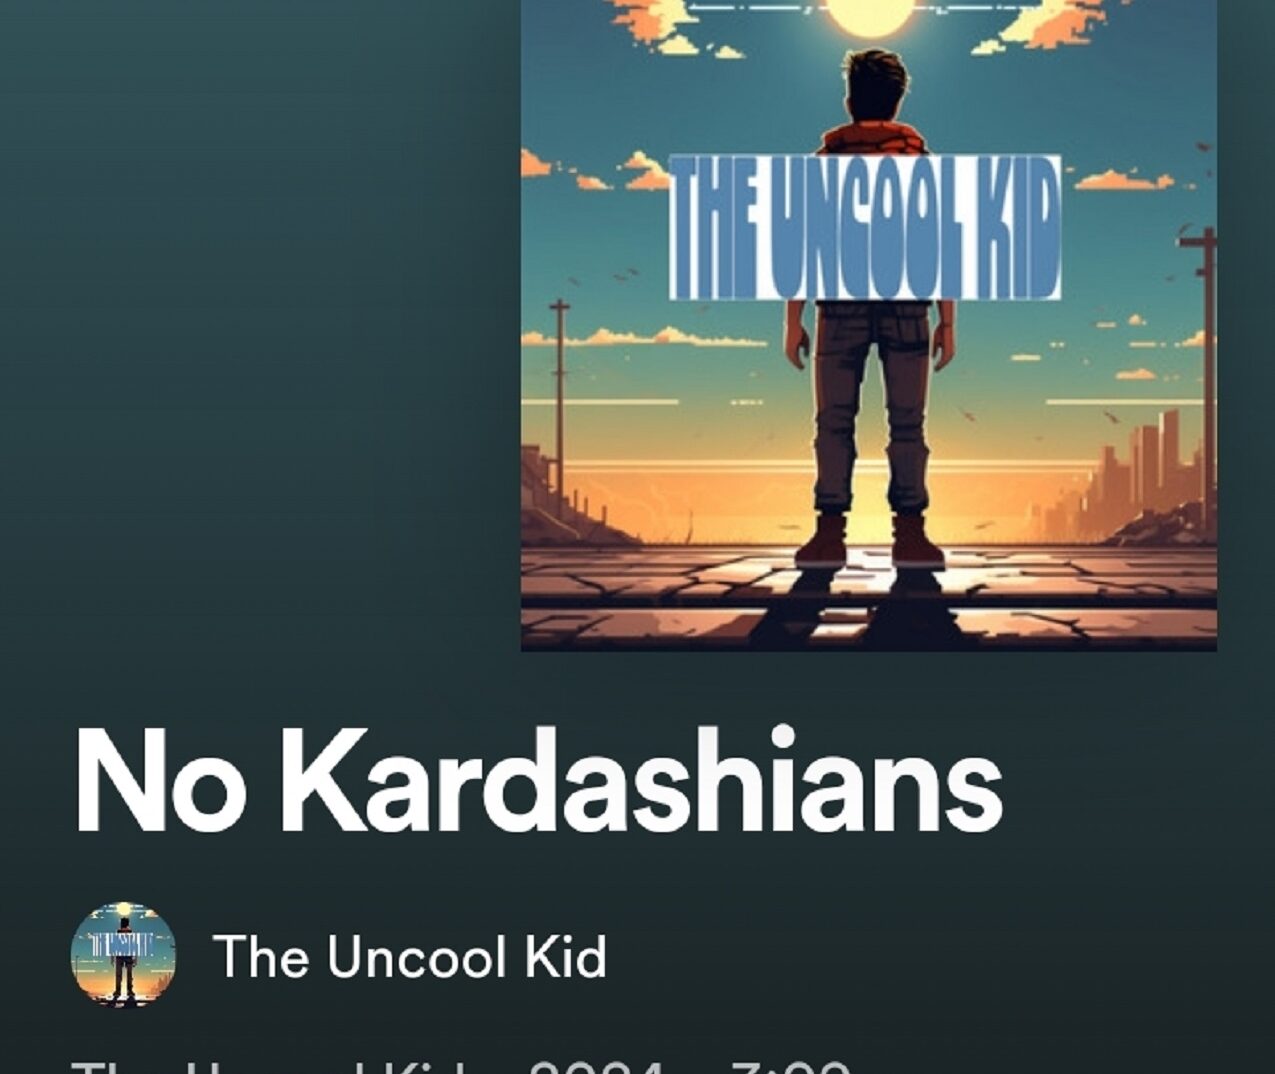 new music from The Uncool Kid